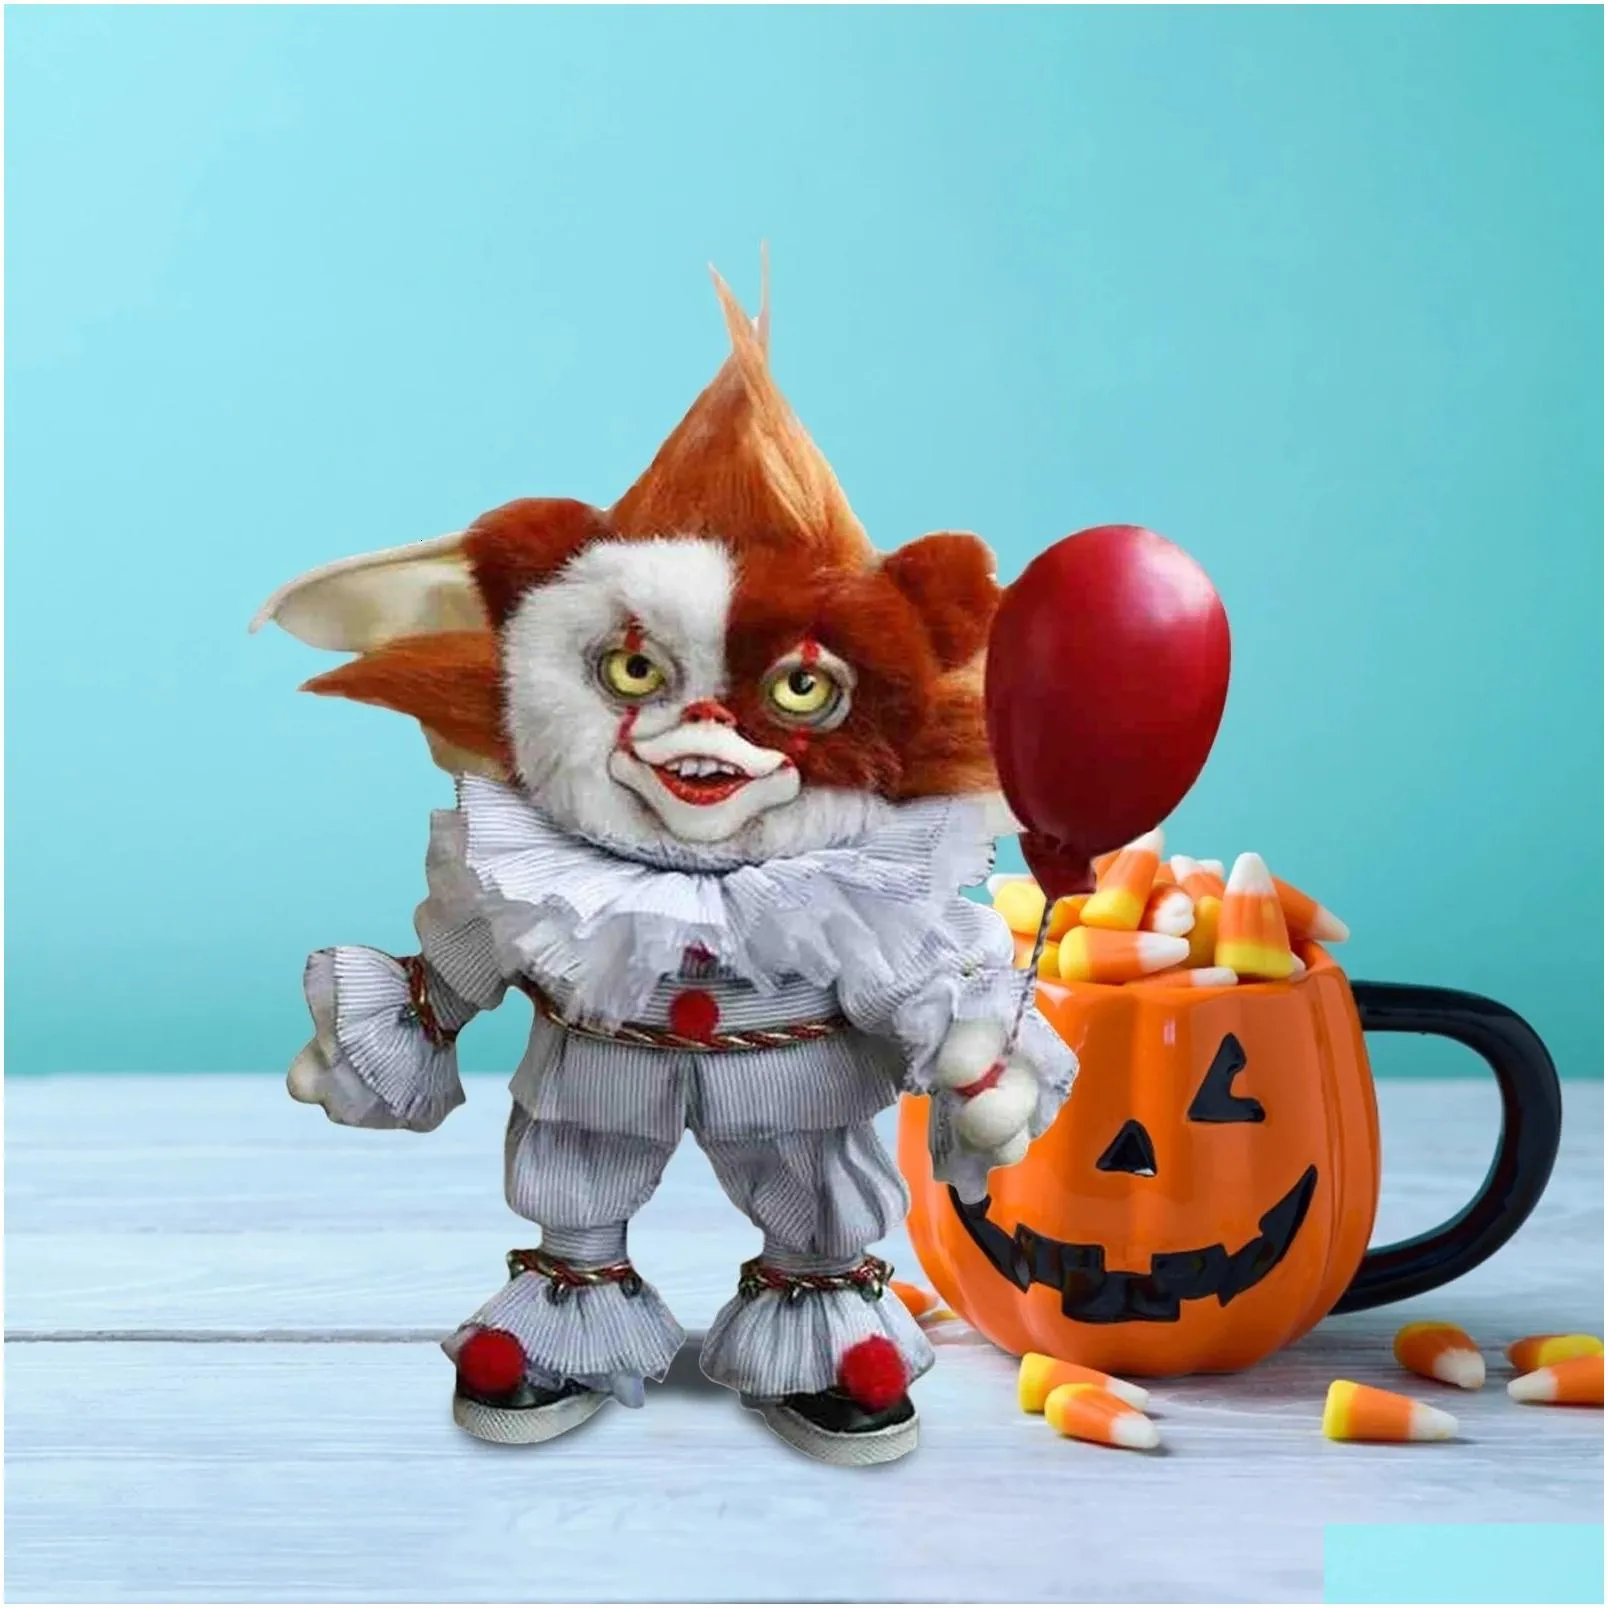 Other Event Party Supplies Creative Mogwai Handmade Doll Cute Gremlins-monster Resin Statue Miniature Art Halloween Decorations For Home Decor